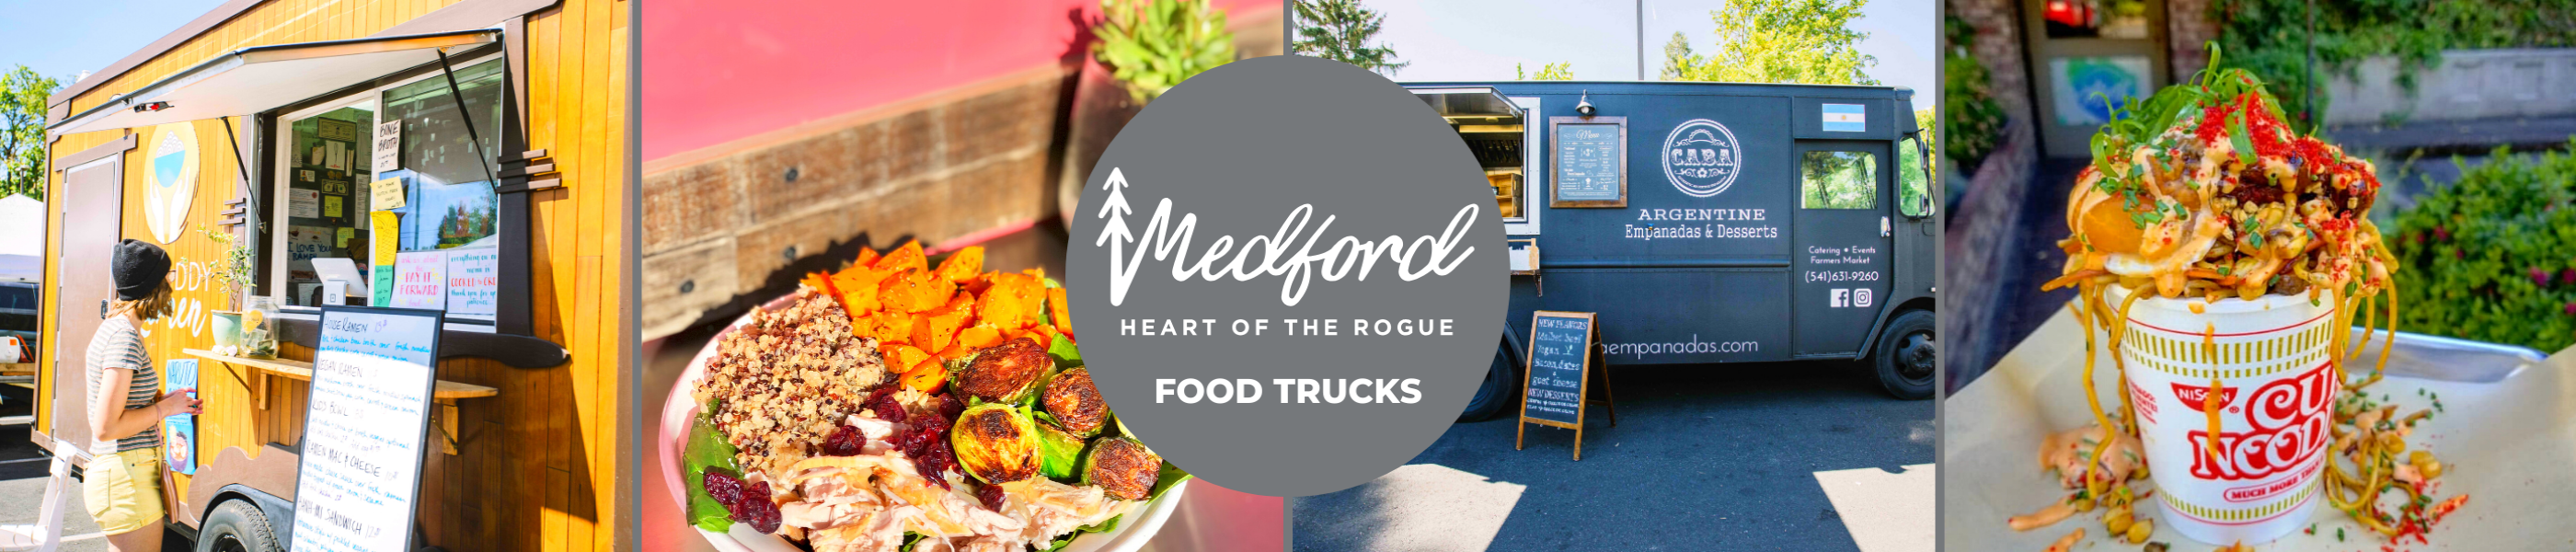 Medford Food Trucks, food, best food in medford, heart of the rogue, places to eat, things to do